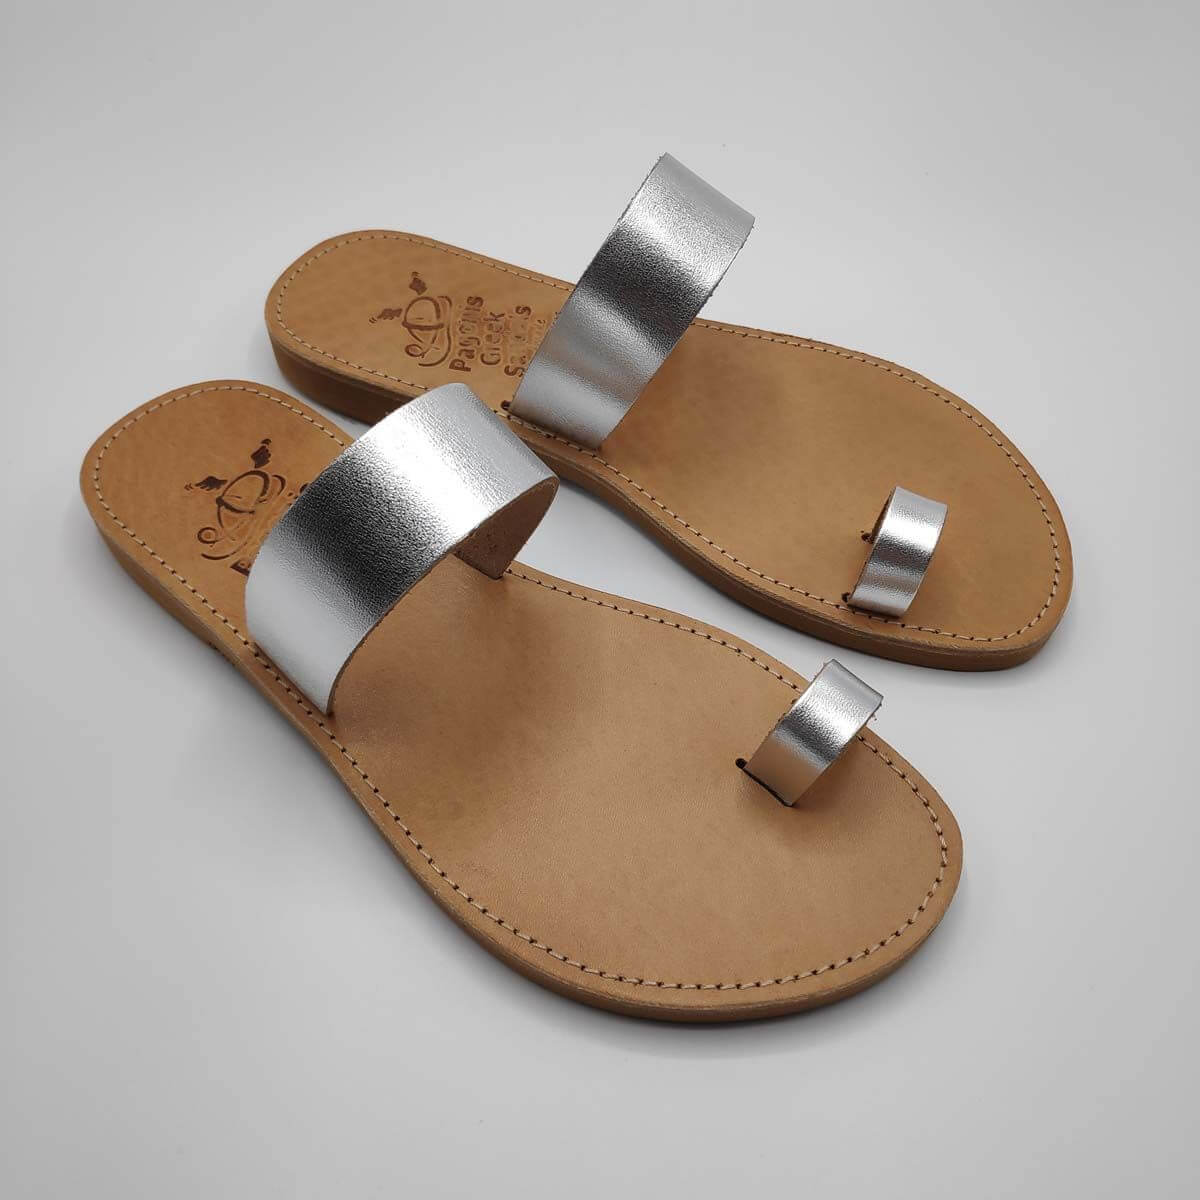 JESUS sandals with toe ring | Pagonis Greek Sandals